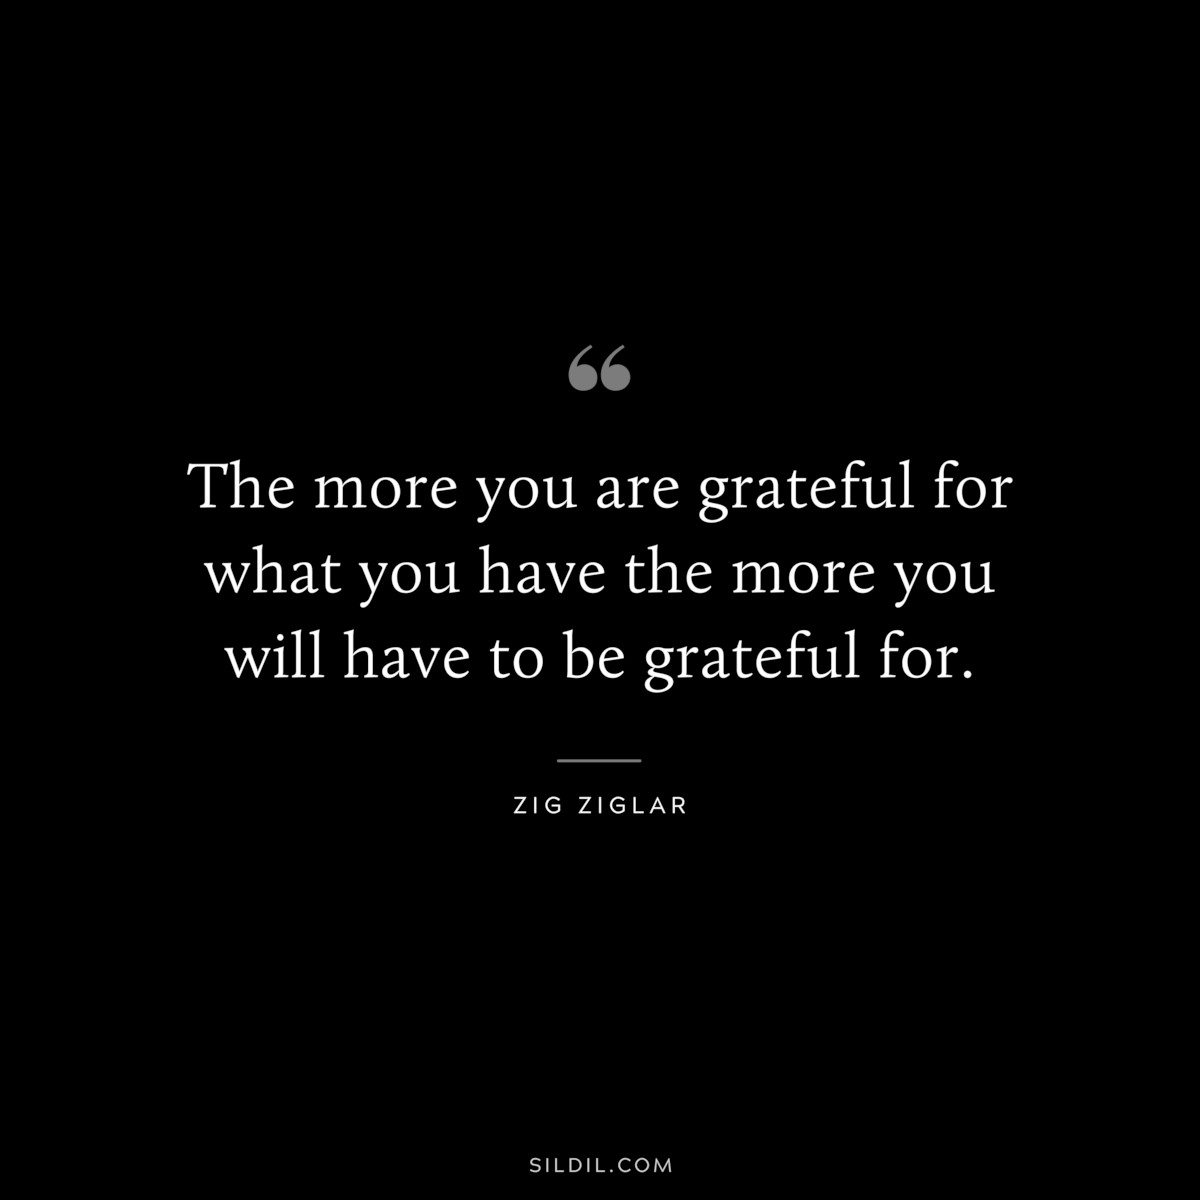 The more you are grateful for what you have the more you will have to be grateful for. ― Zig Ziglar